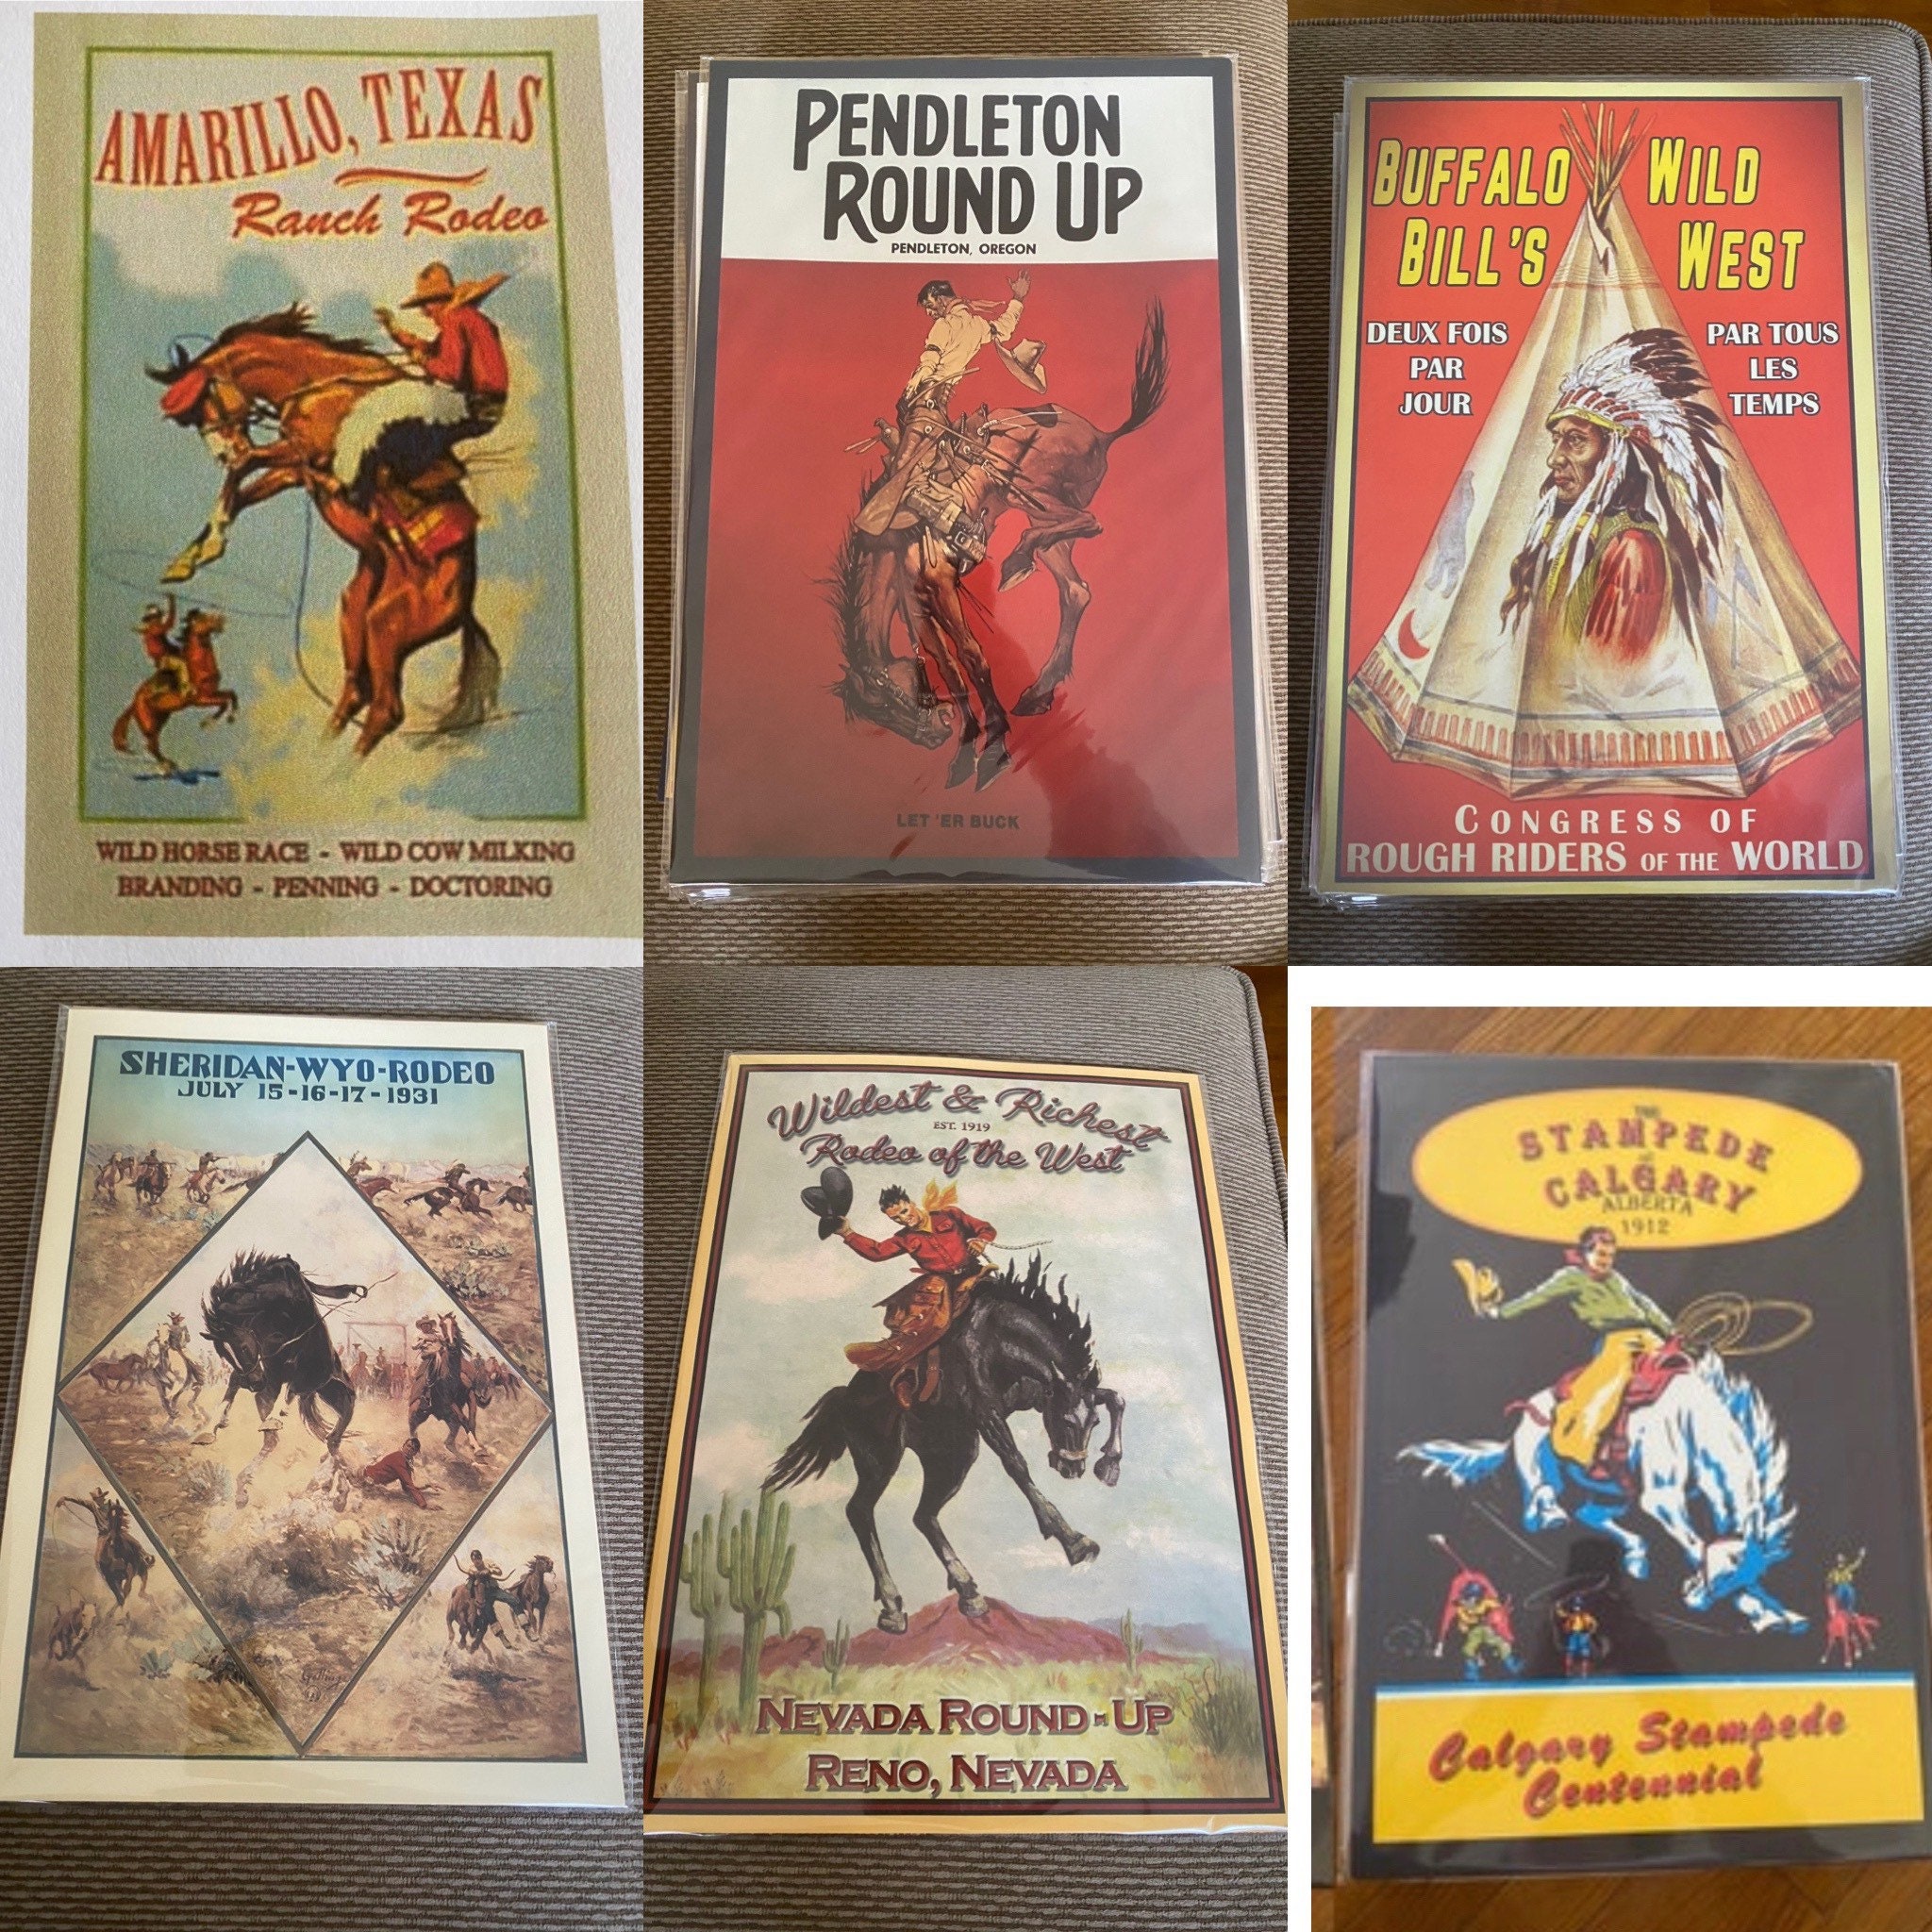 12”x18” Vintage Rodeo Posters Preorder** will ship in 2-3 weeks